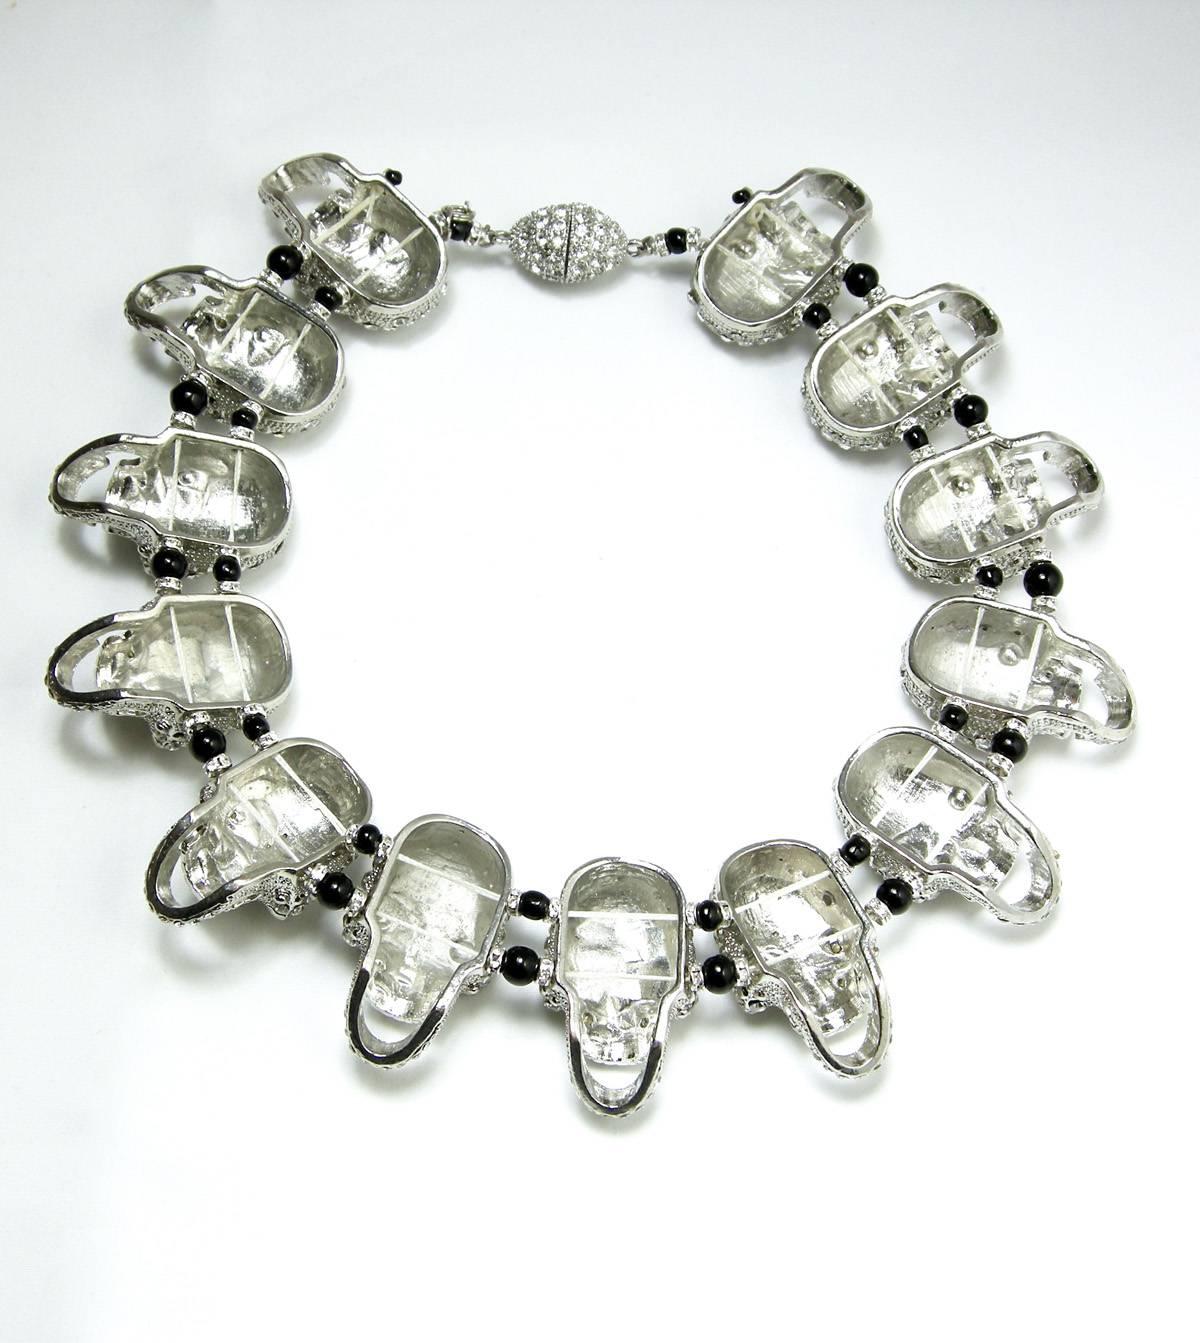 Women's One of a Kind Robert Sorrell Silver Tone Skull Necklace